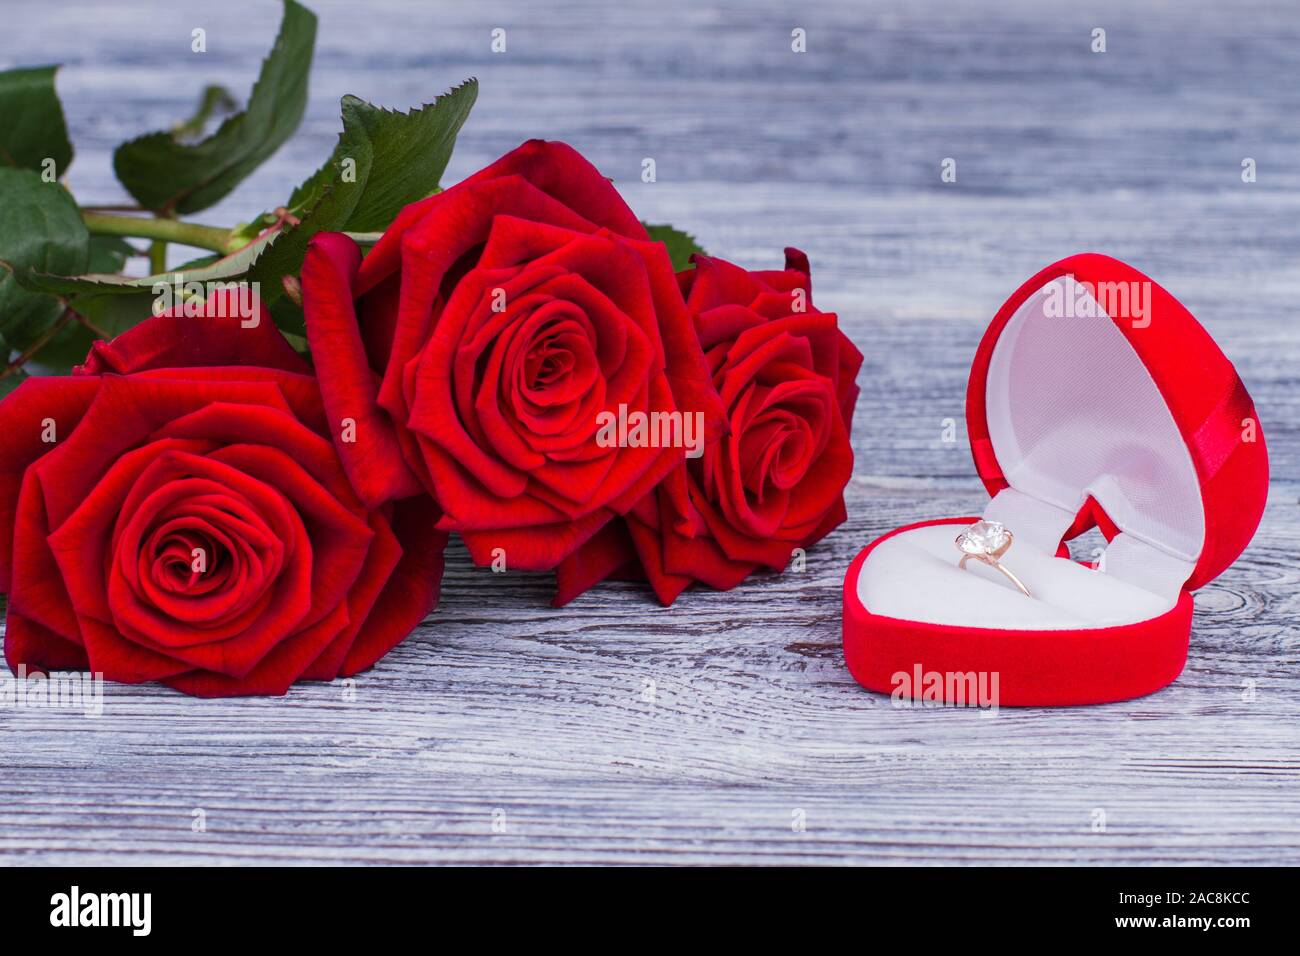 Diamond ring in heart shaped box with flowers. Stock Photo